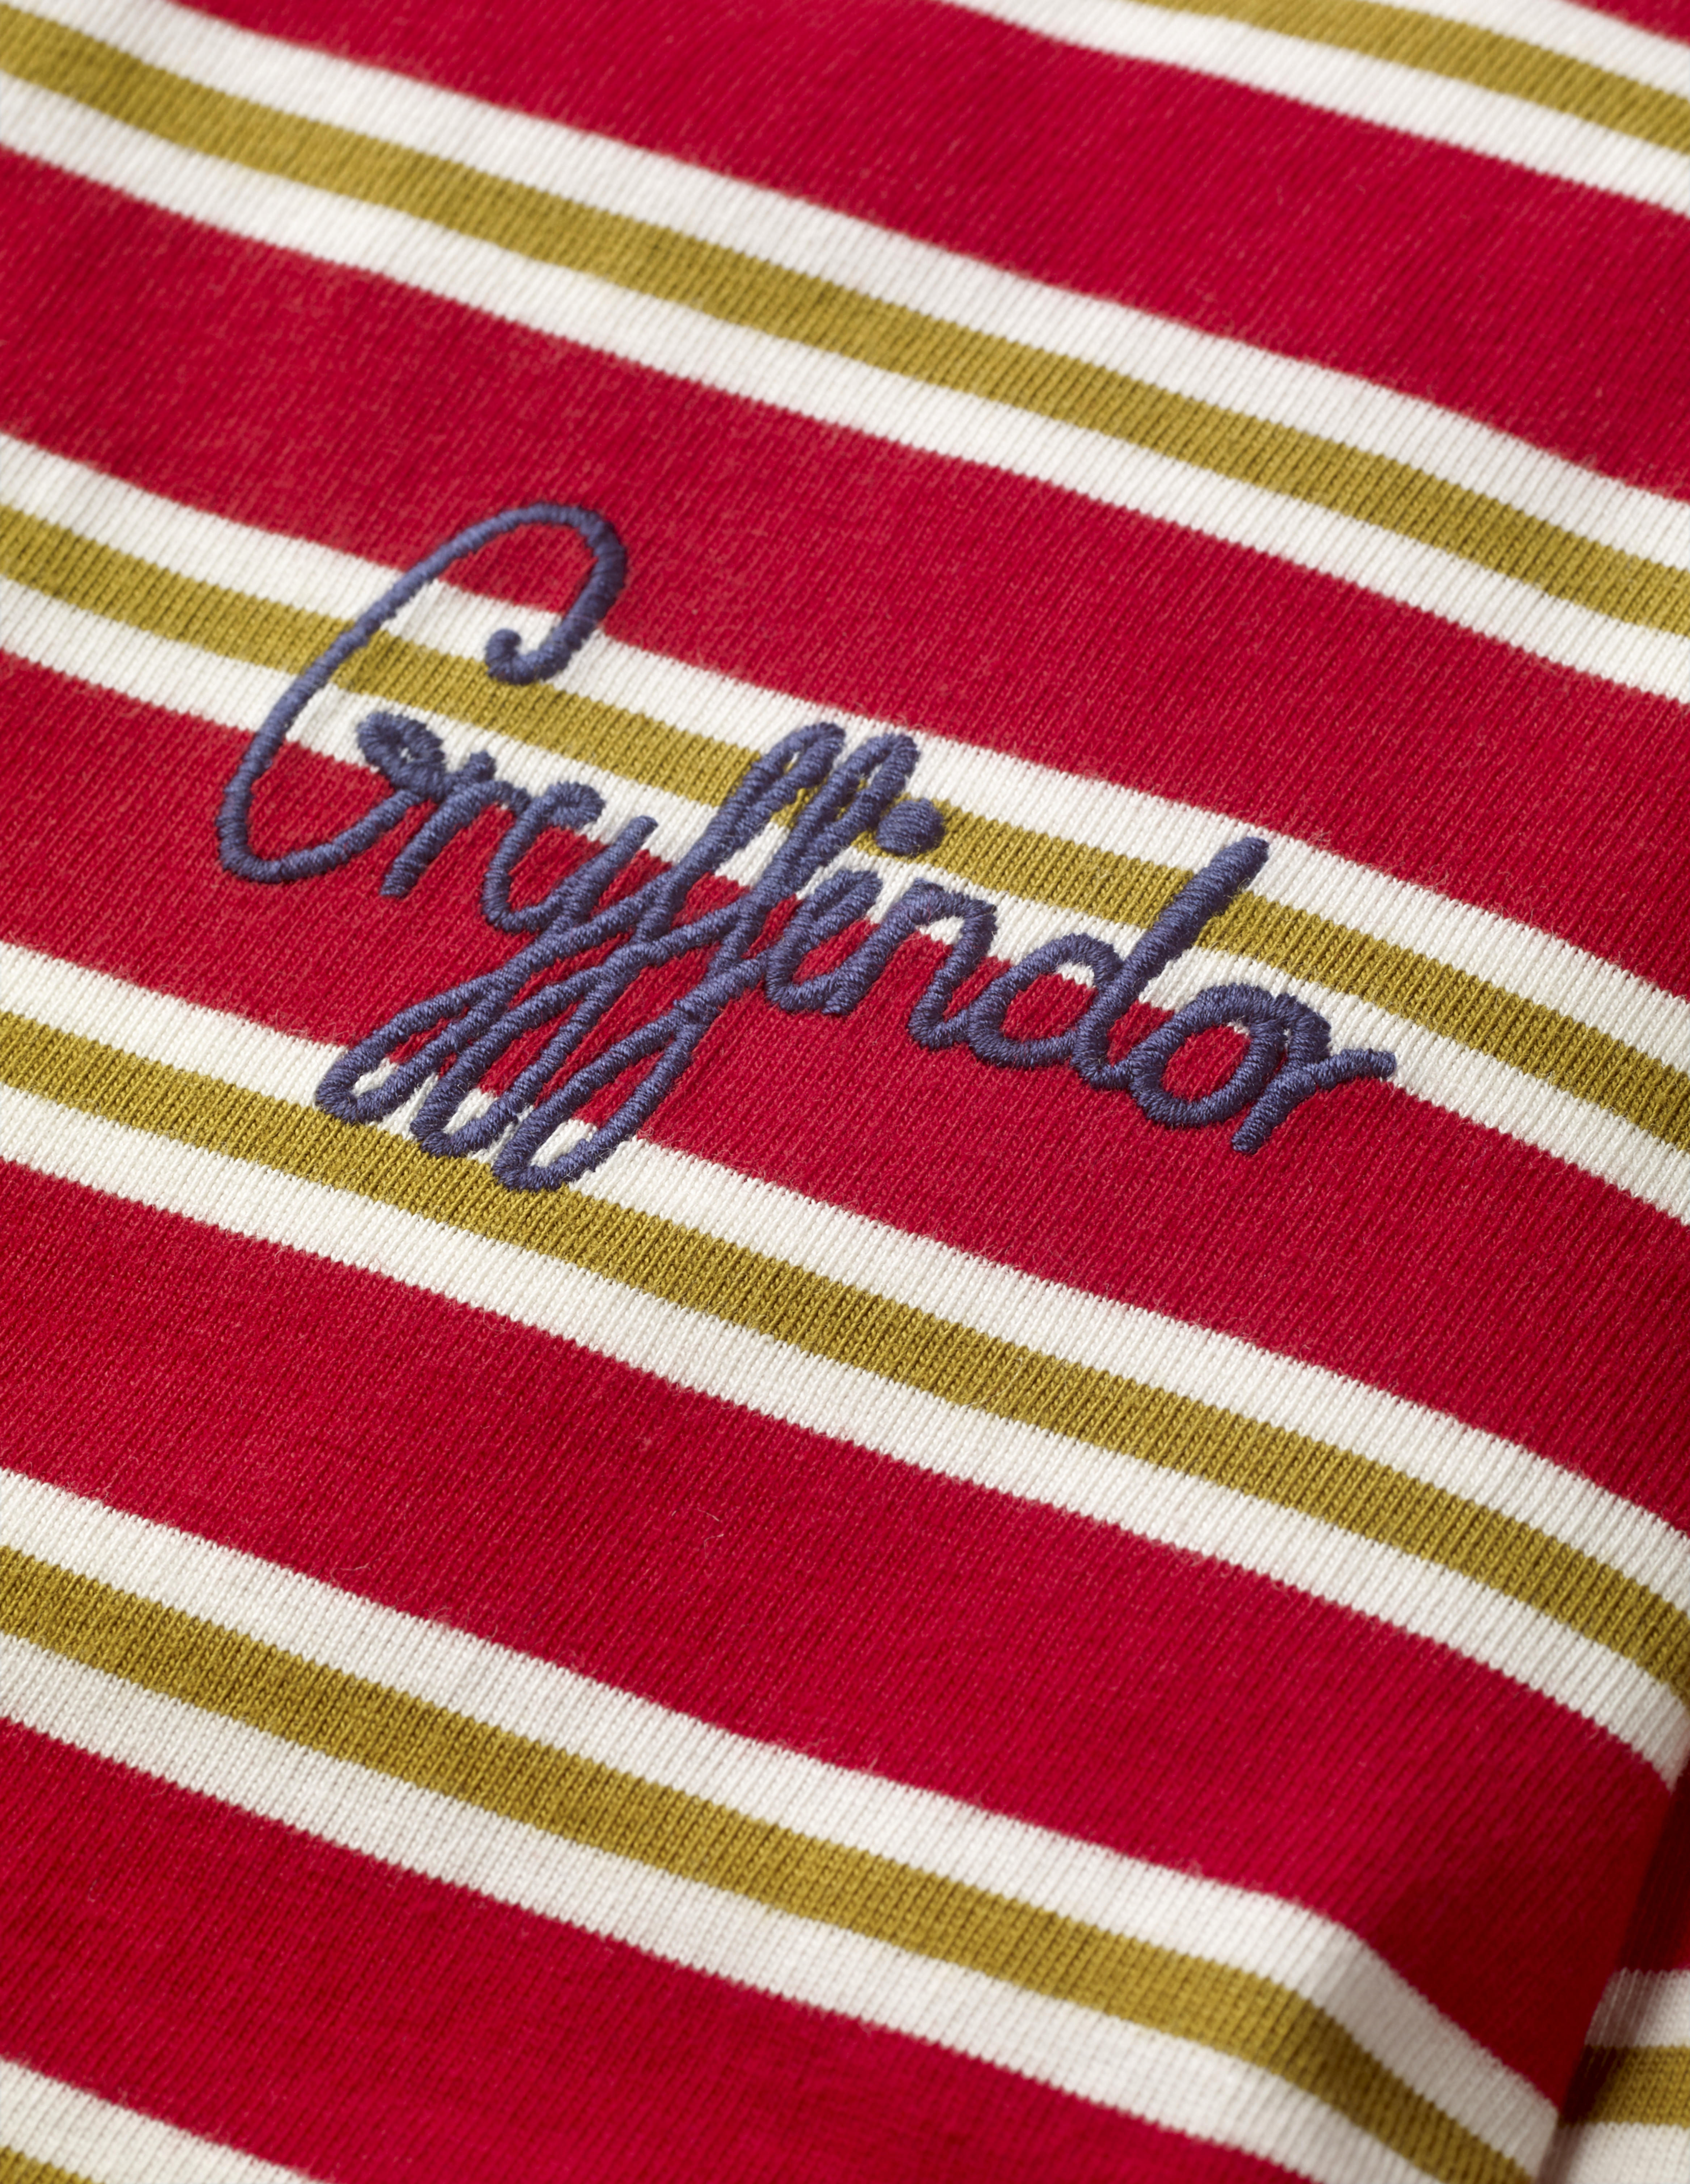 This close-up of the Mini Boden House Breton in red better shows the word “Gryffindor” written in blue script in the front pocket area. It retails between £20 and £22.